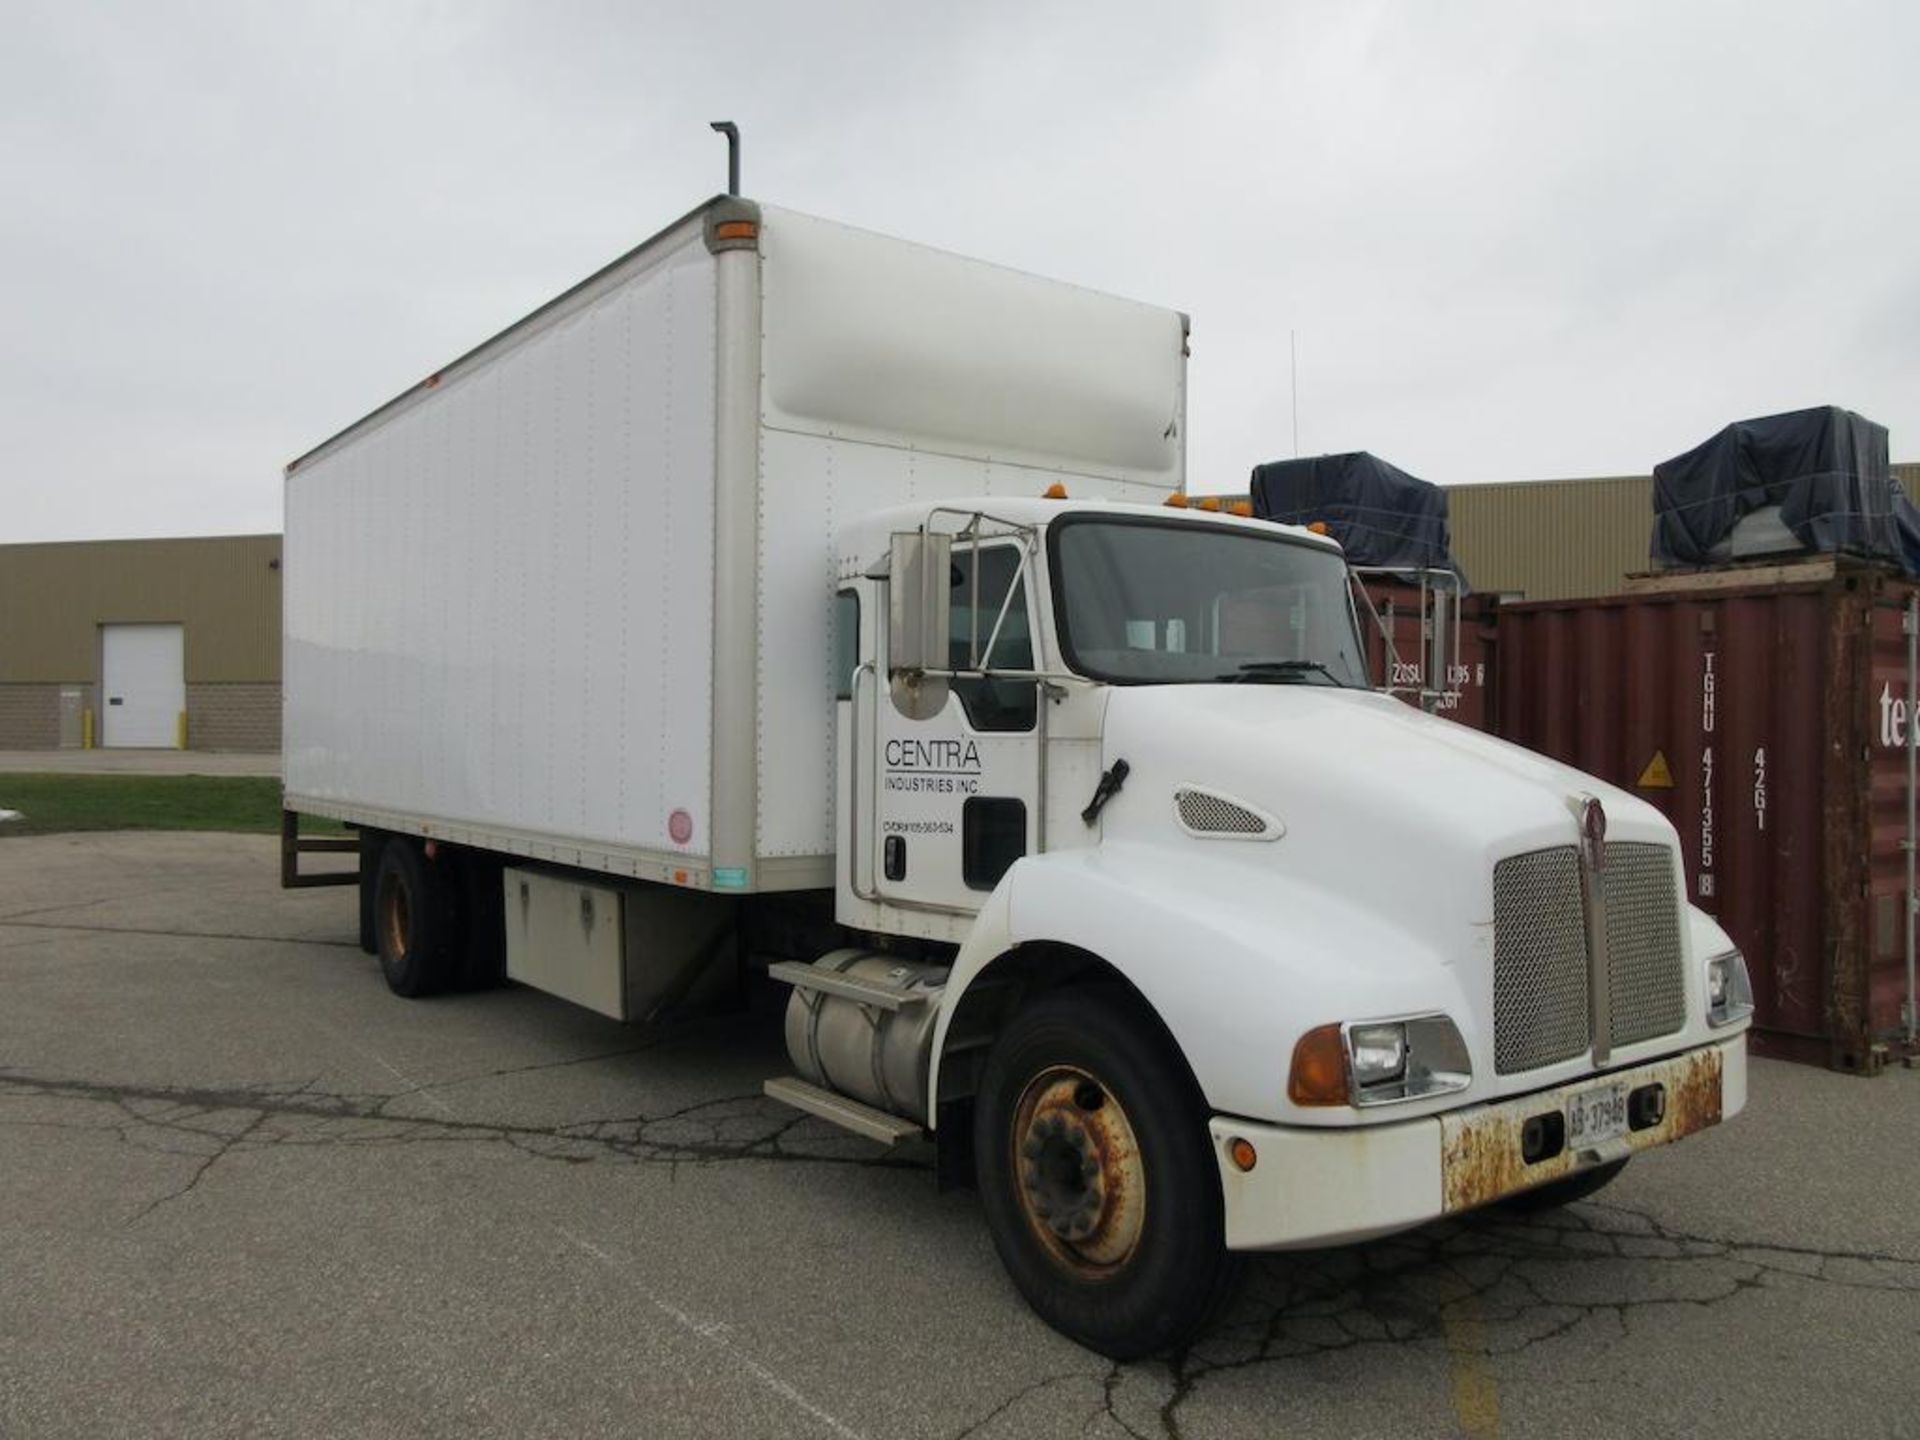 2006 Kenworth box truck model T300, 625,059 KM indicated, 10,866 hrs indicated, engine model ISB 260